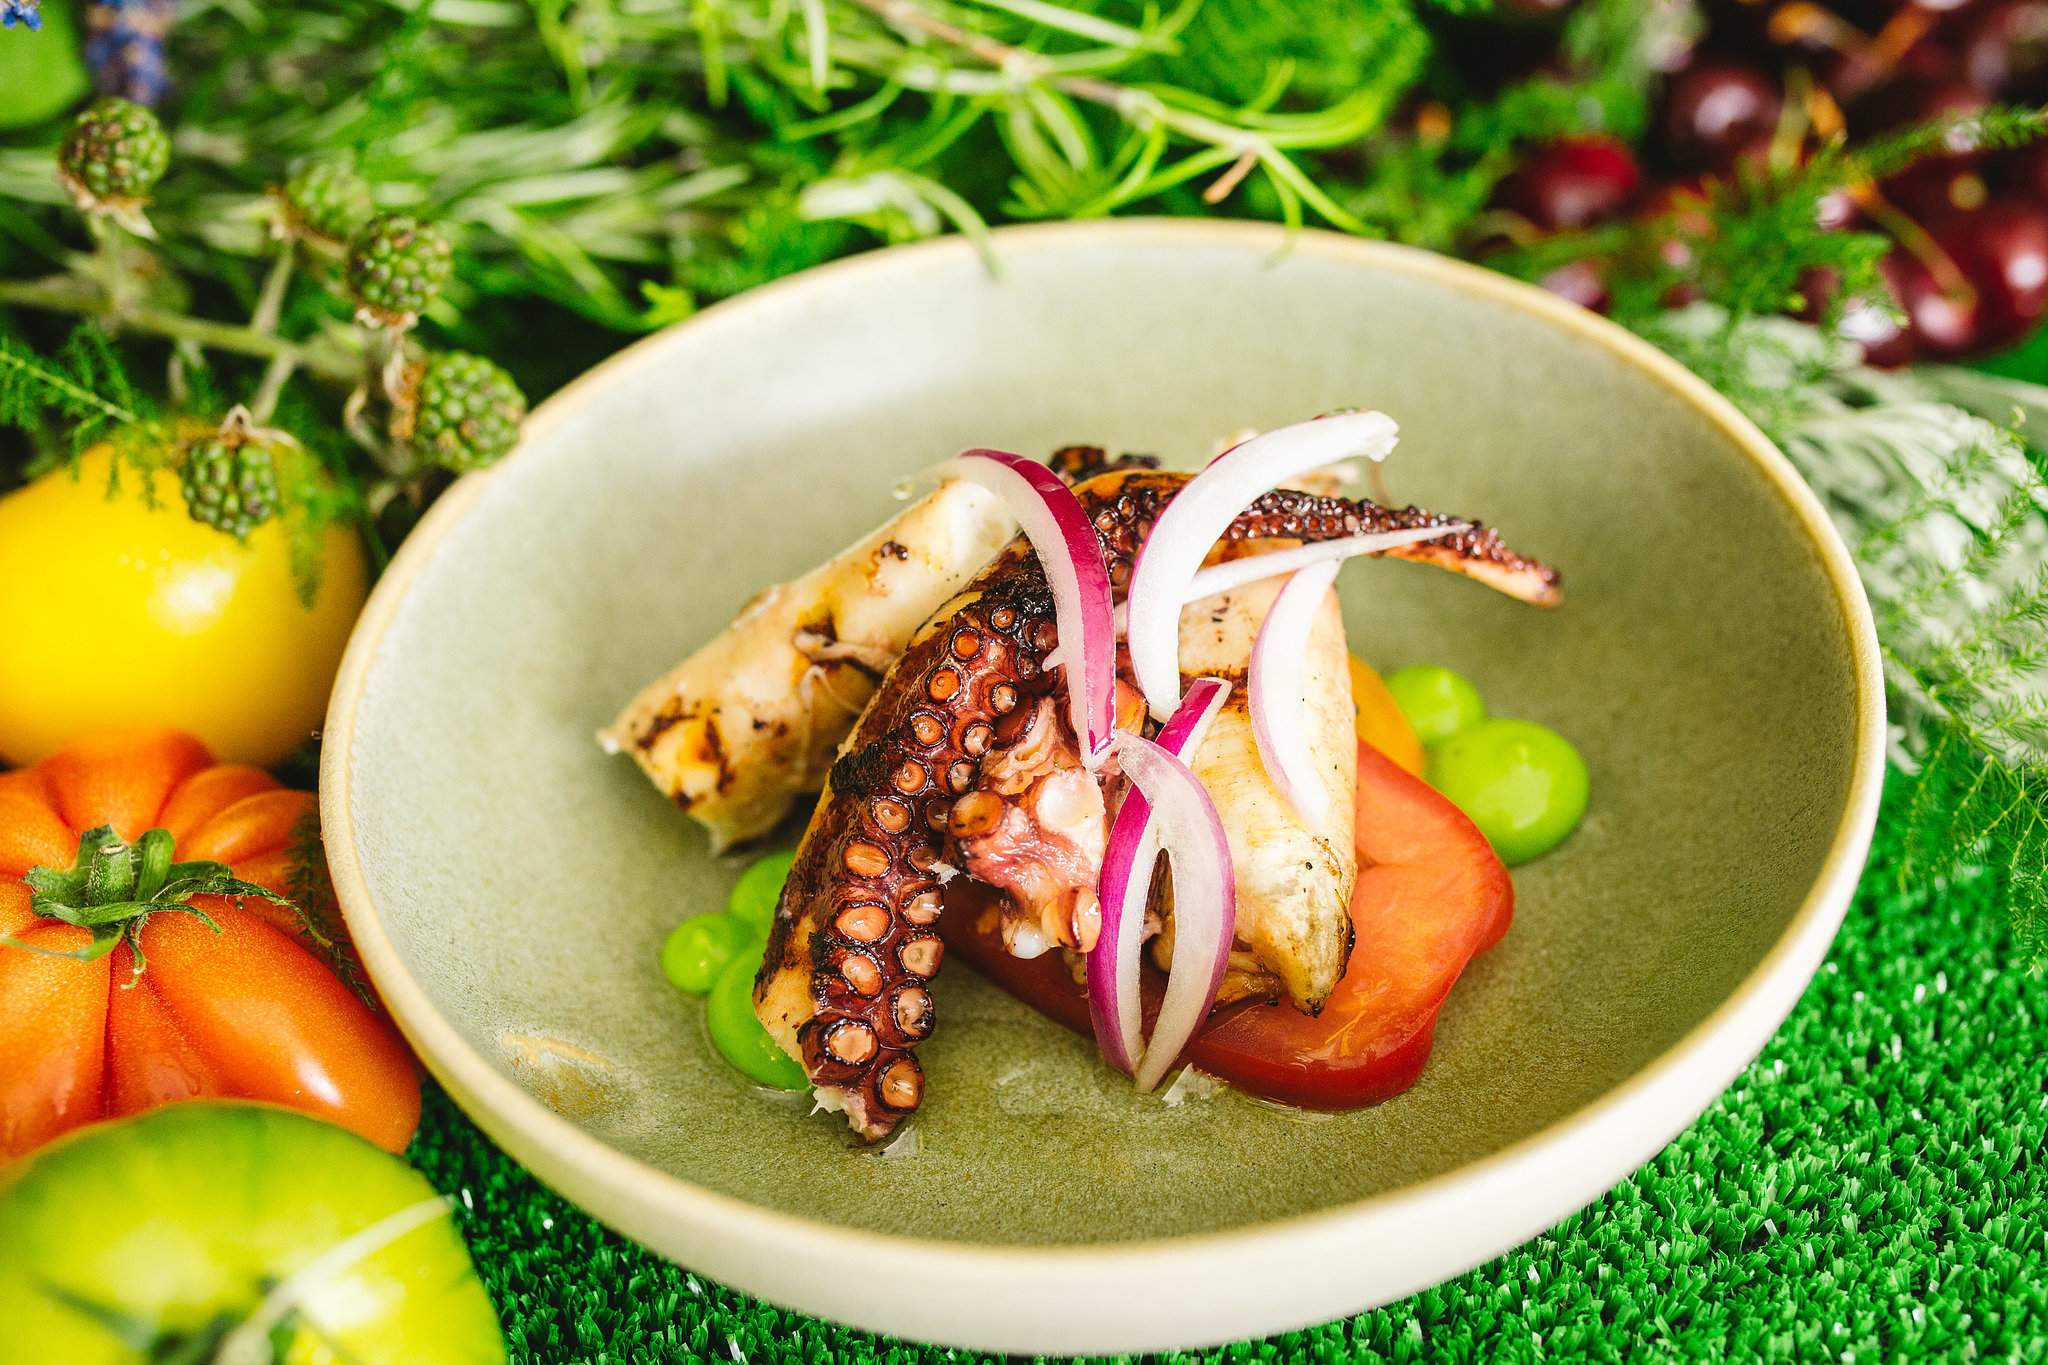 A meal of octopus and veggies